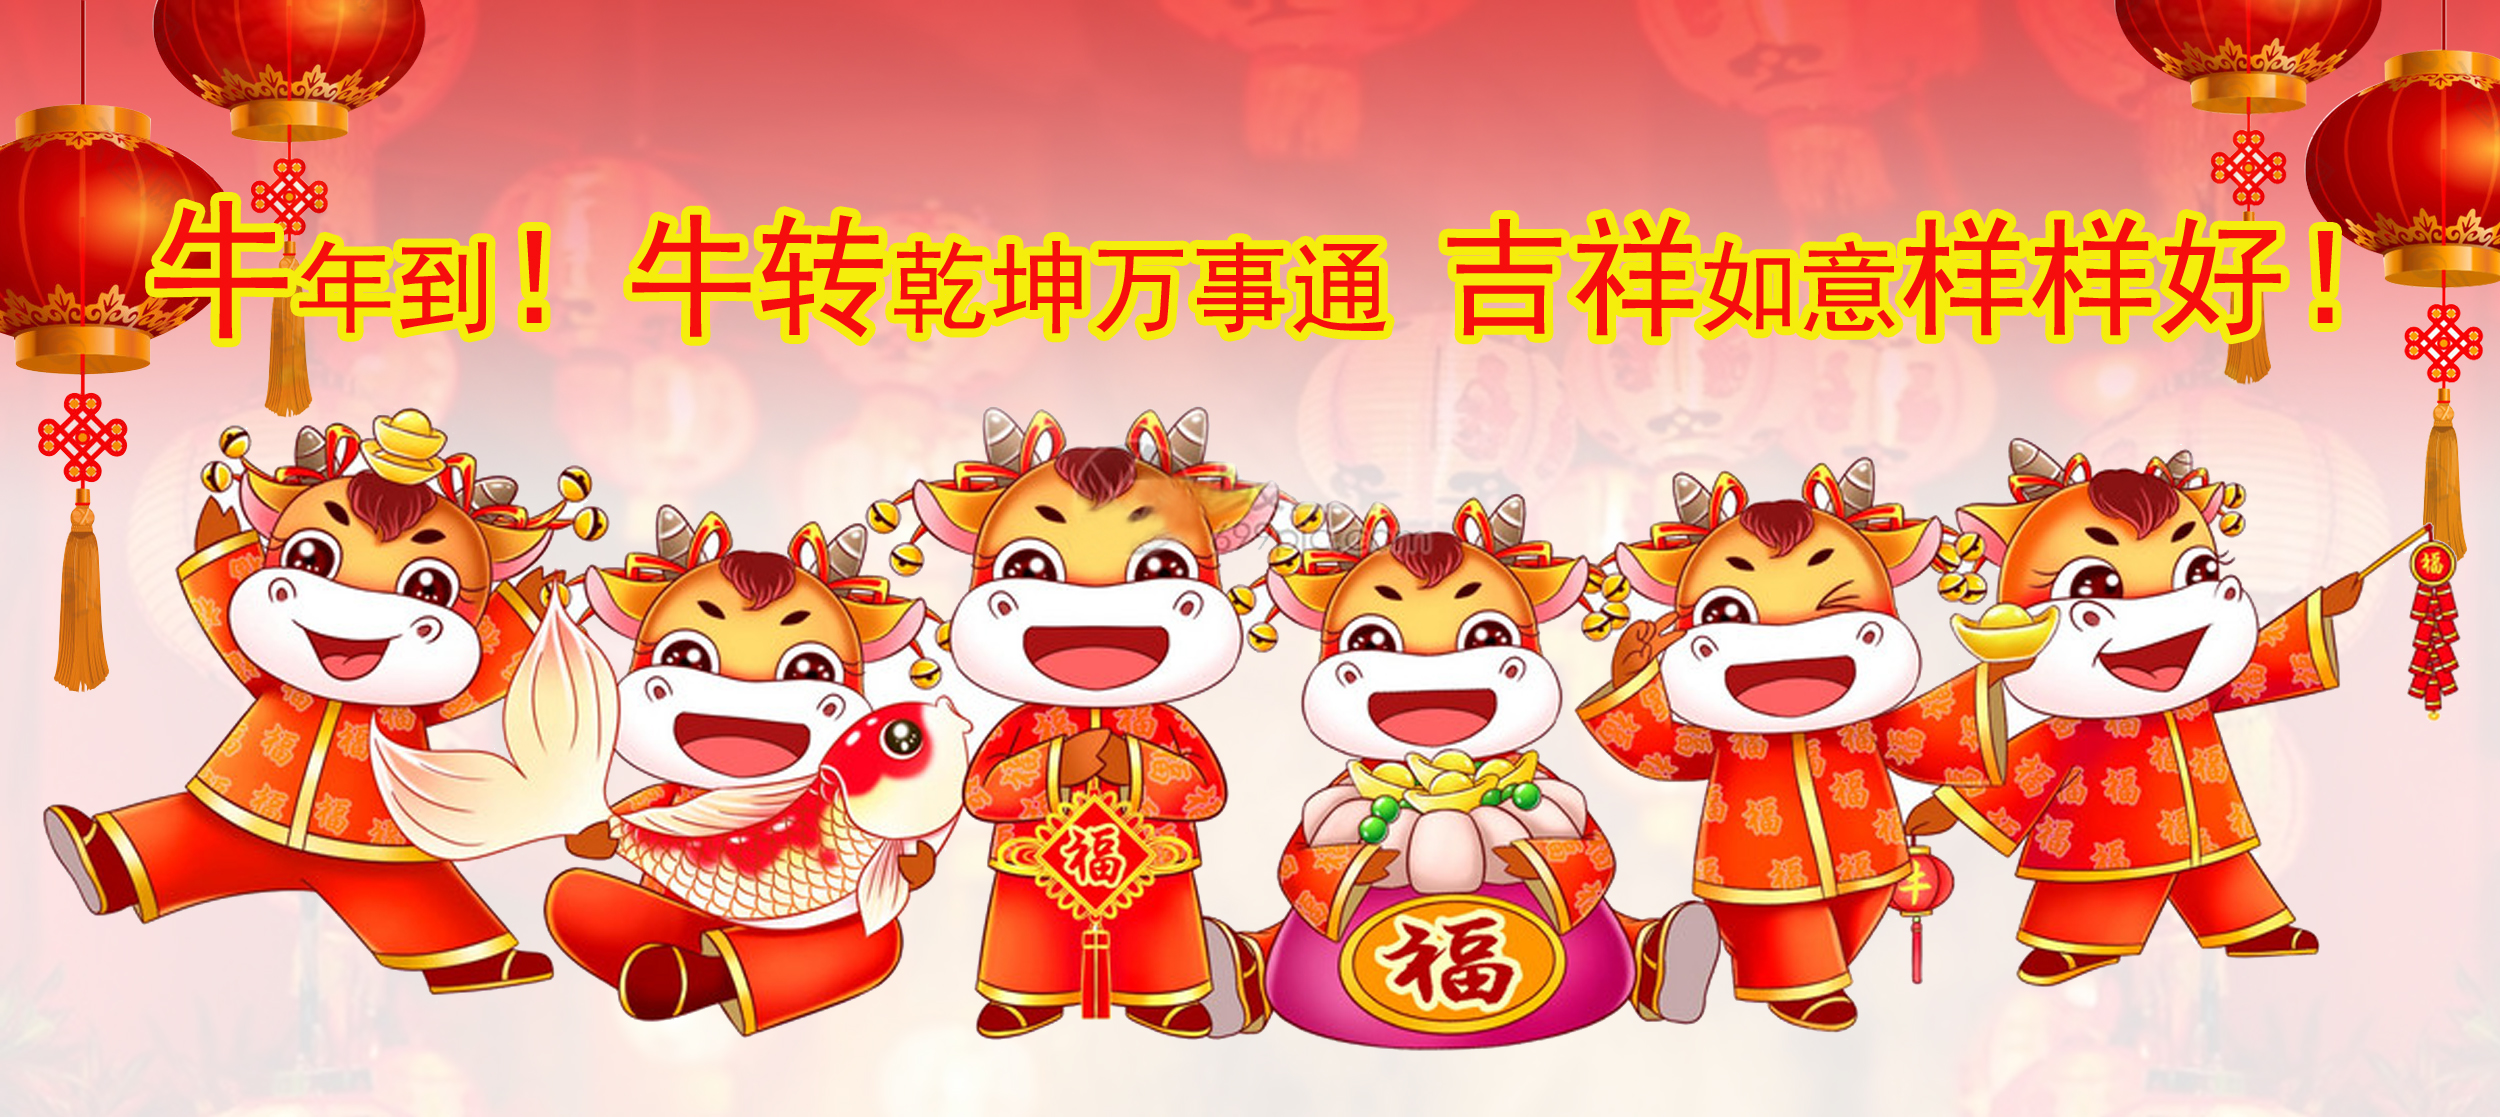 Image OPENING HOURS EXTENDED FOR CNY 2021